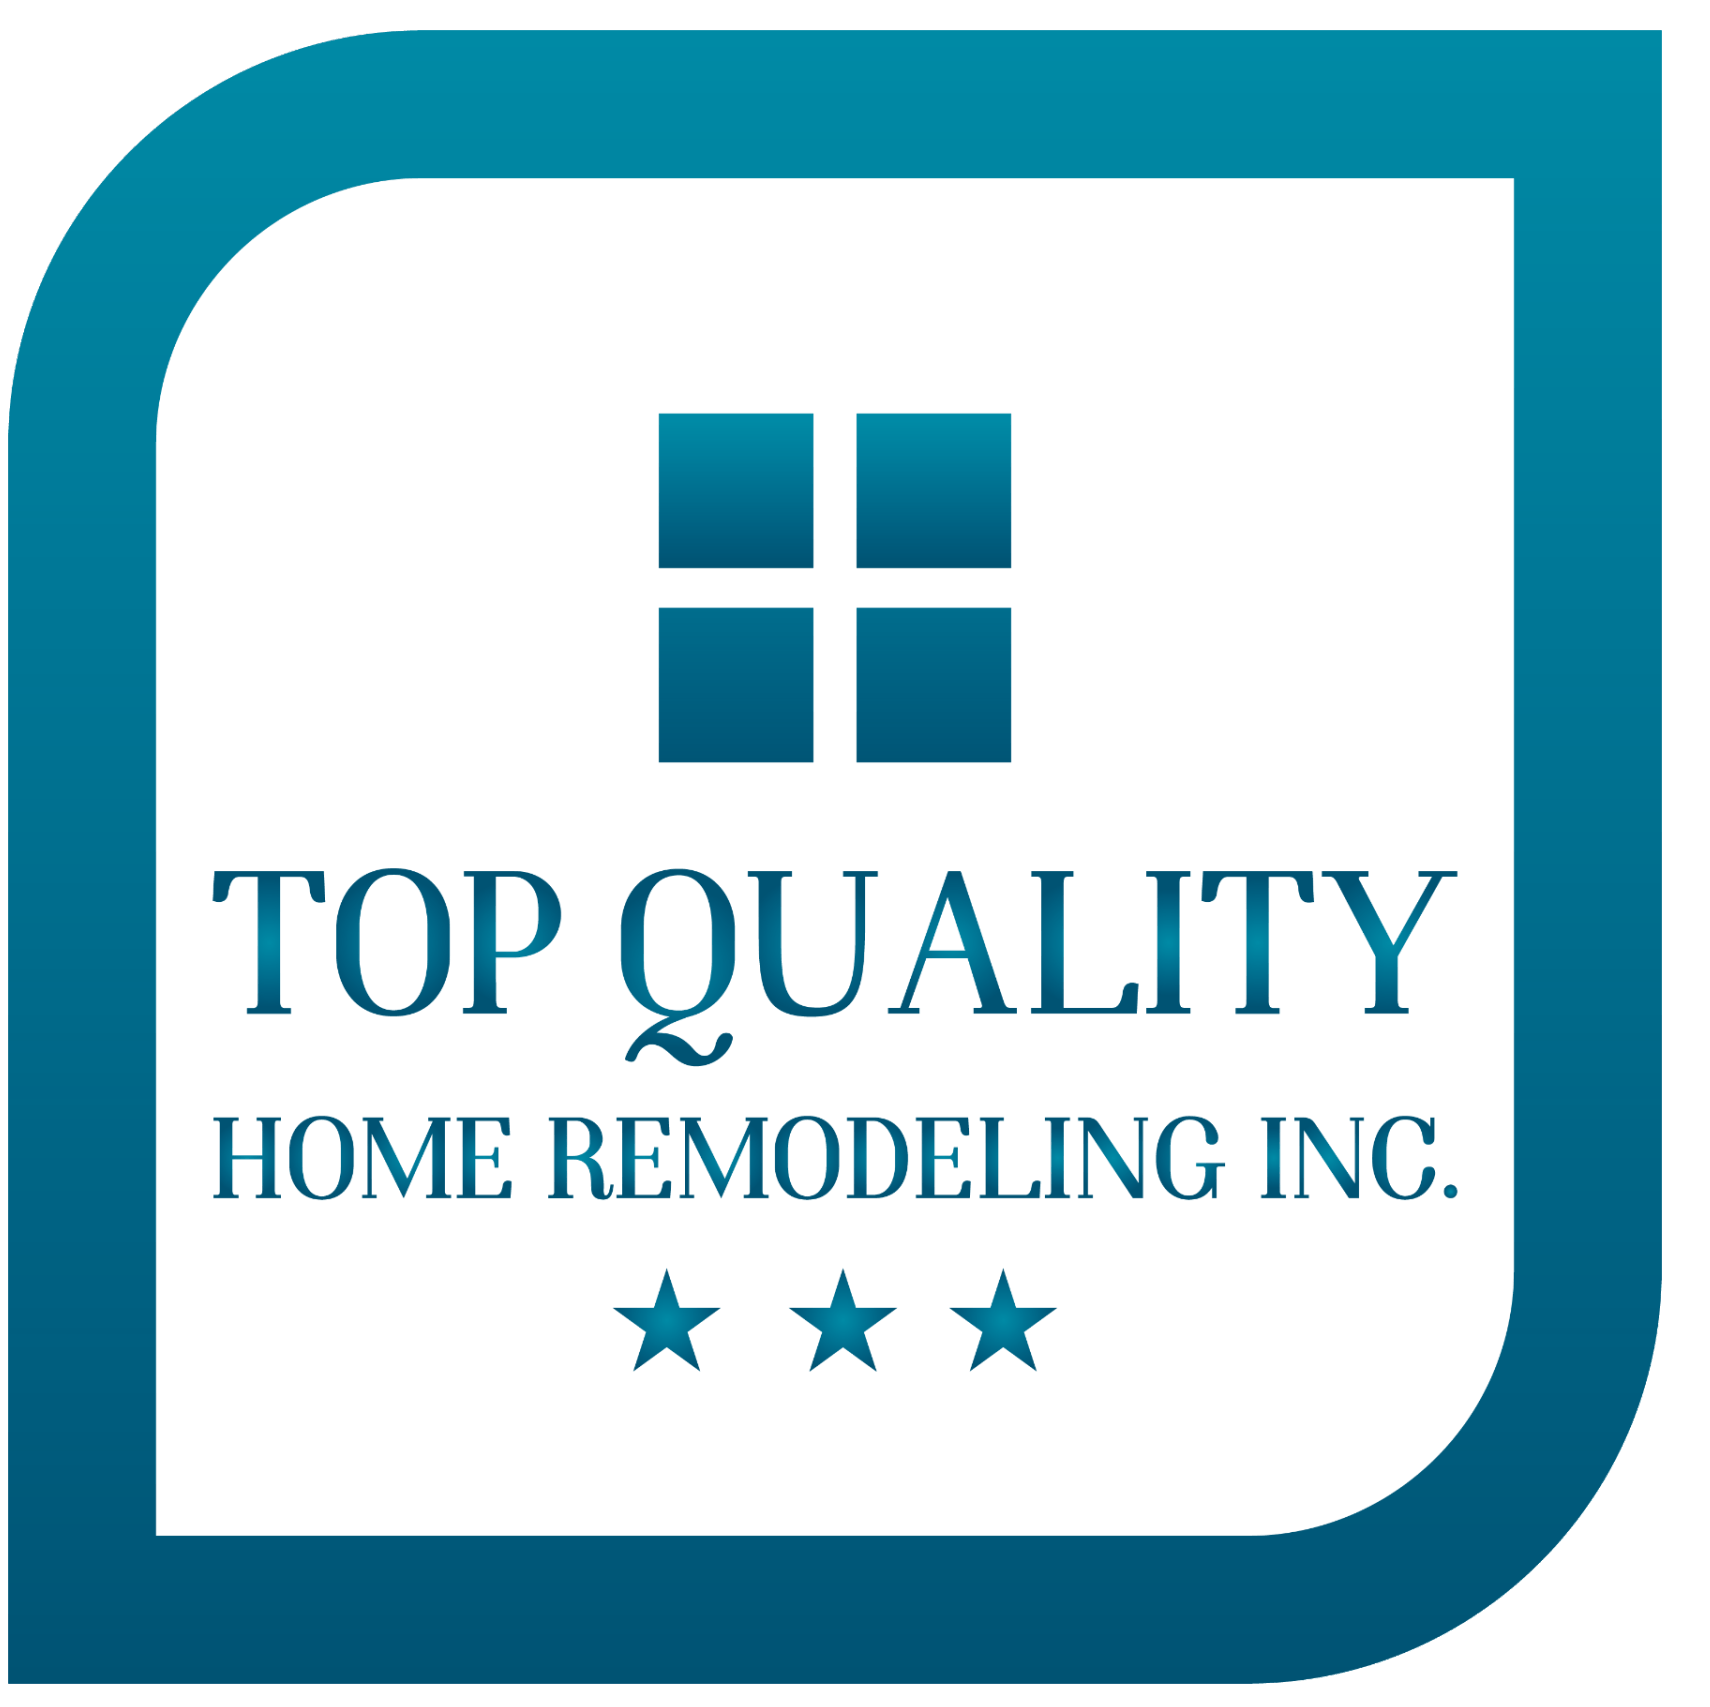 Top Quality Home Remodeling Inc logo